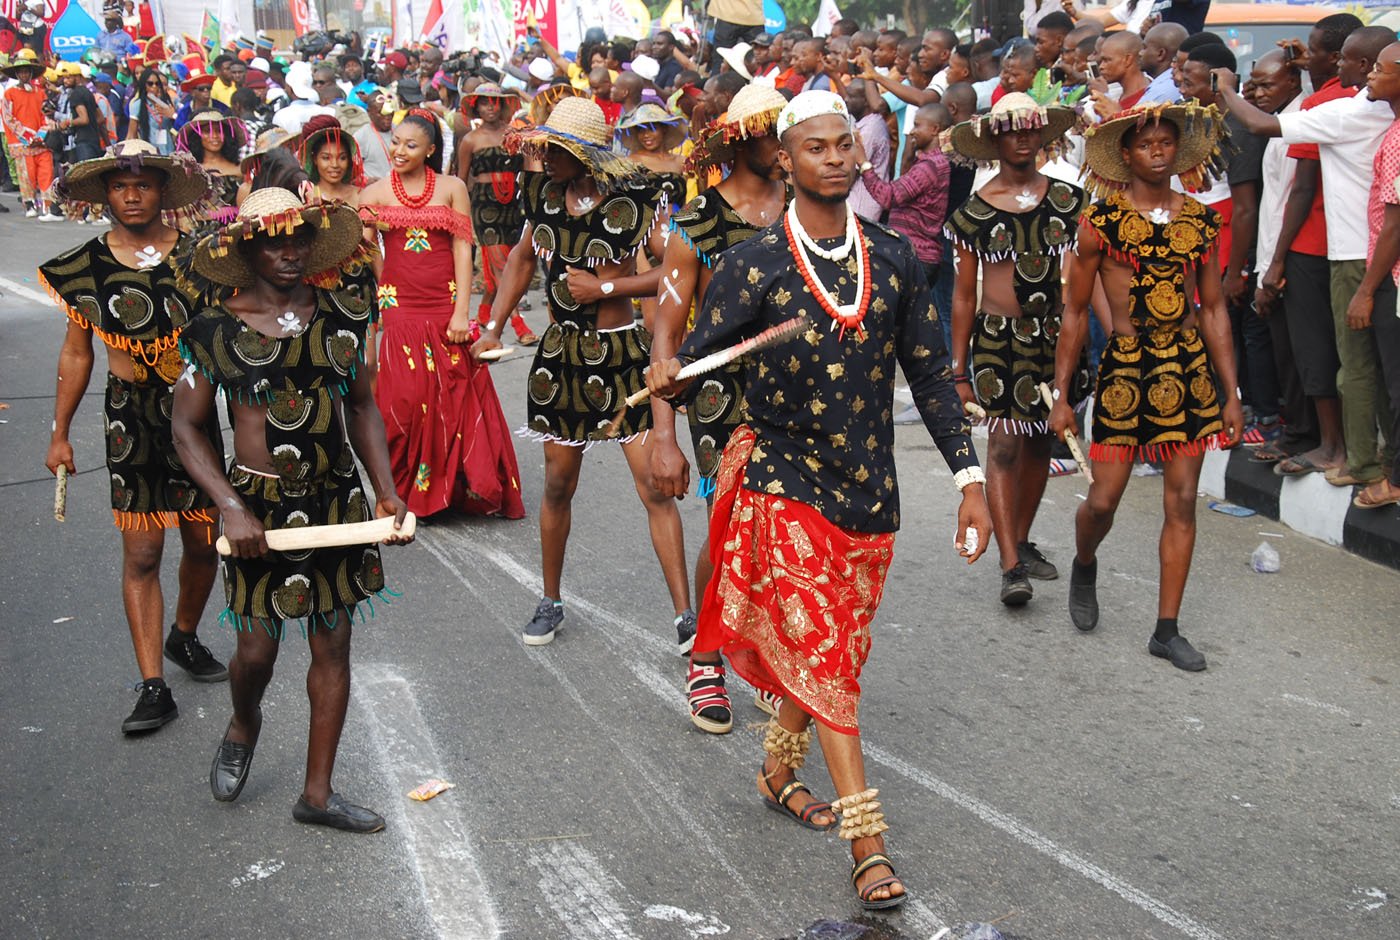 Members of Non-Competing Imo State Band during the Main Event of the 2017 Carnival Calabar in Cross River State Yesterday. Photo: Nwankpa Chijioke